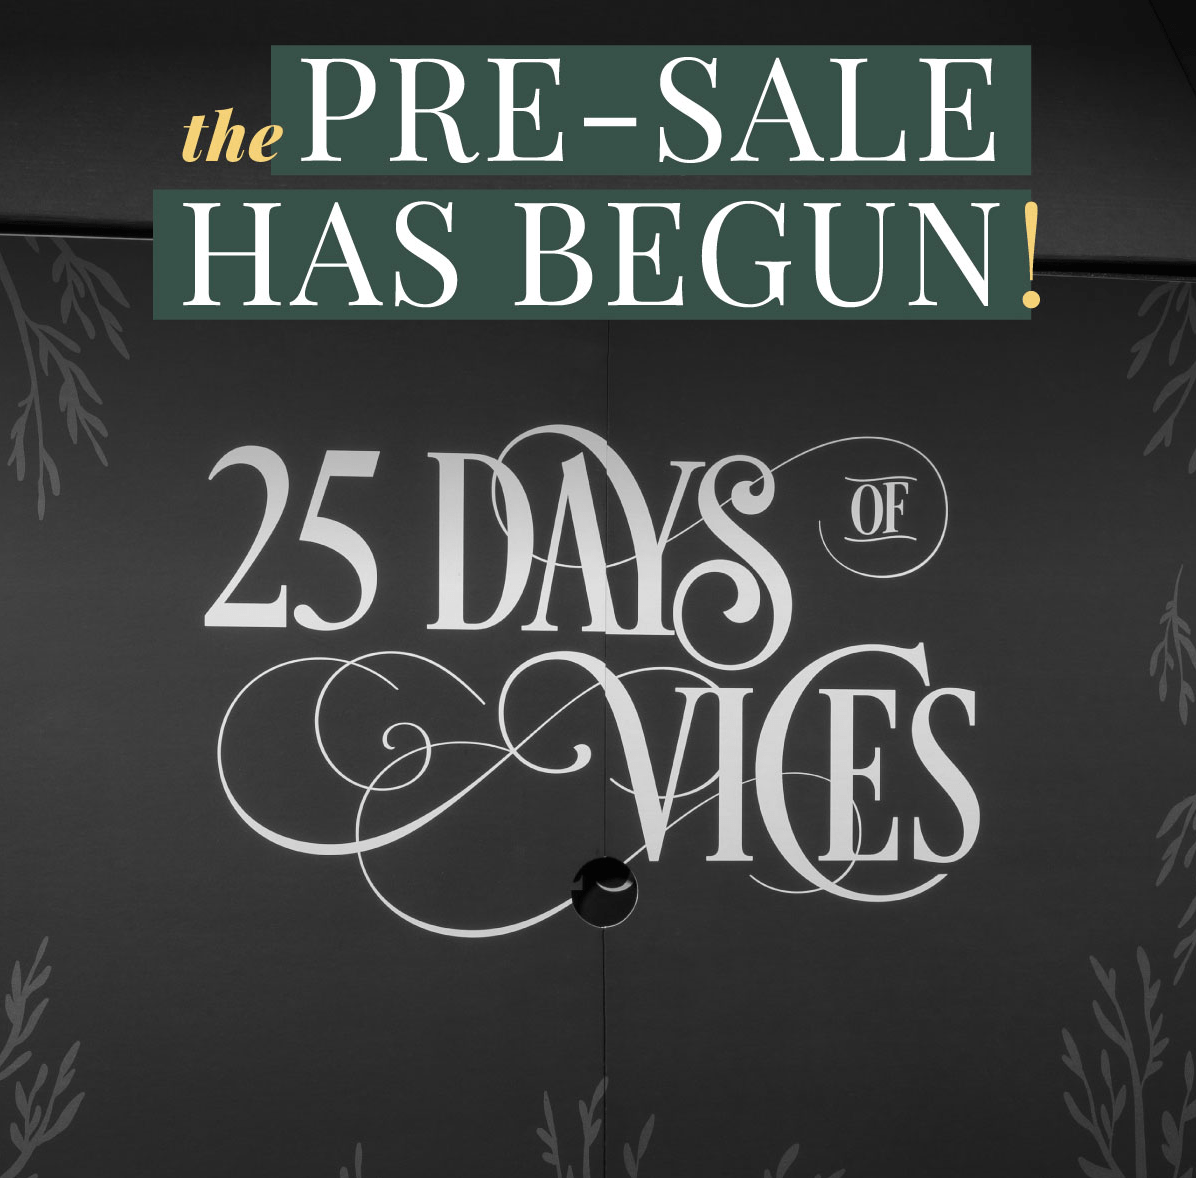 25 Days of Vices Advent Calendar – Now Available